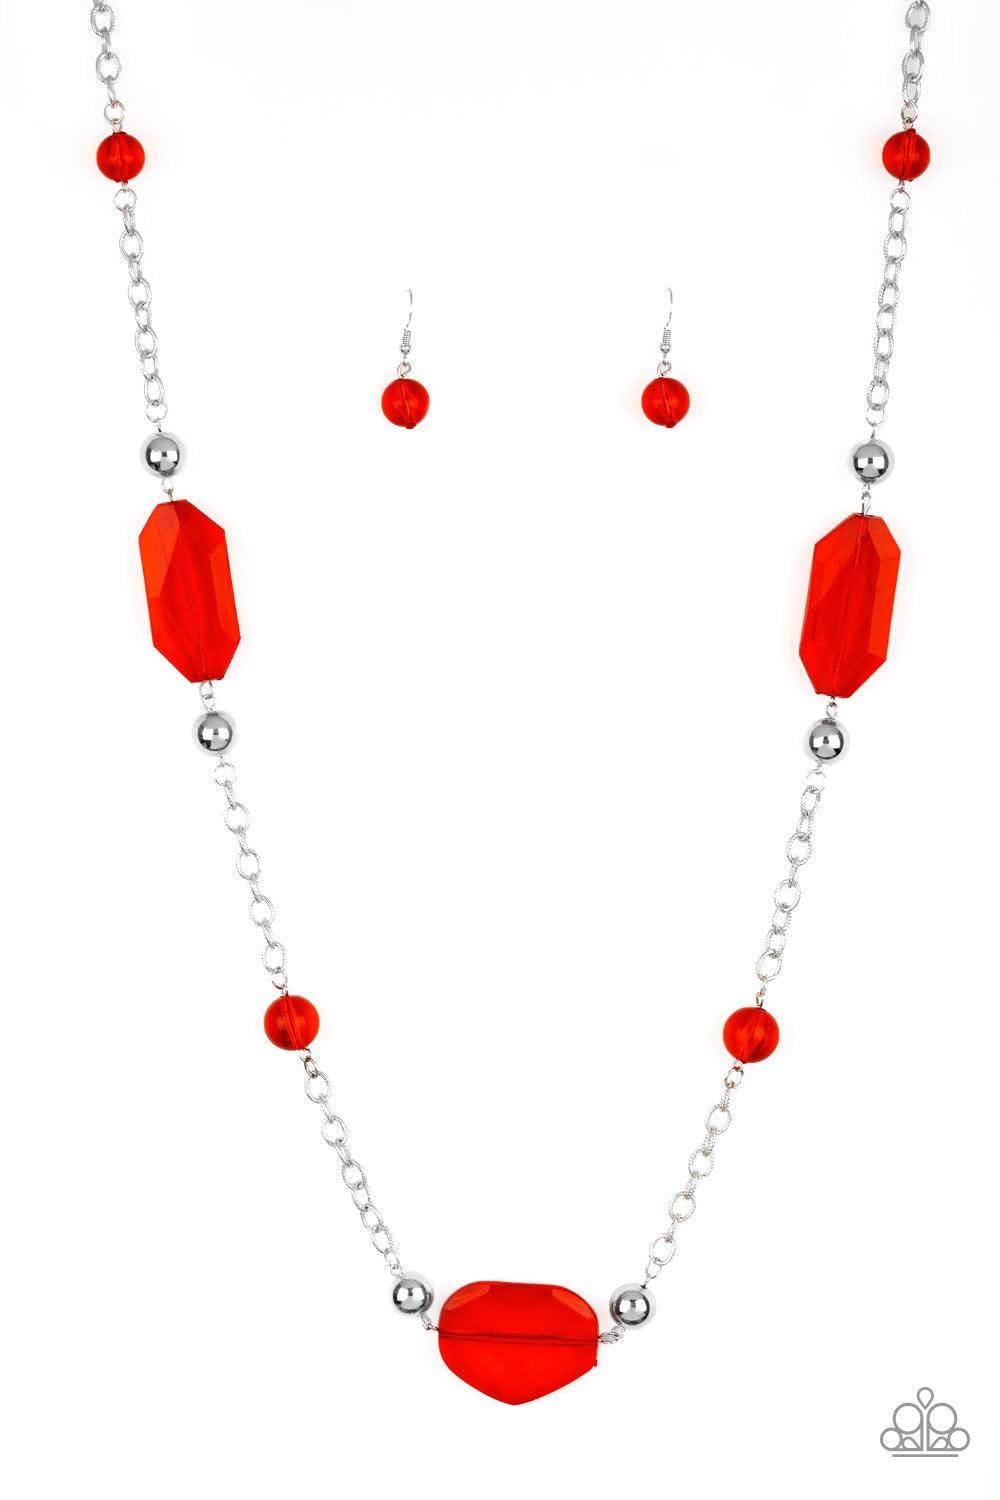 Paparazzi Accessories - Crystal Charm - Red Necklace - Bling by JessieK